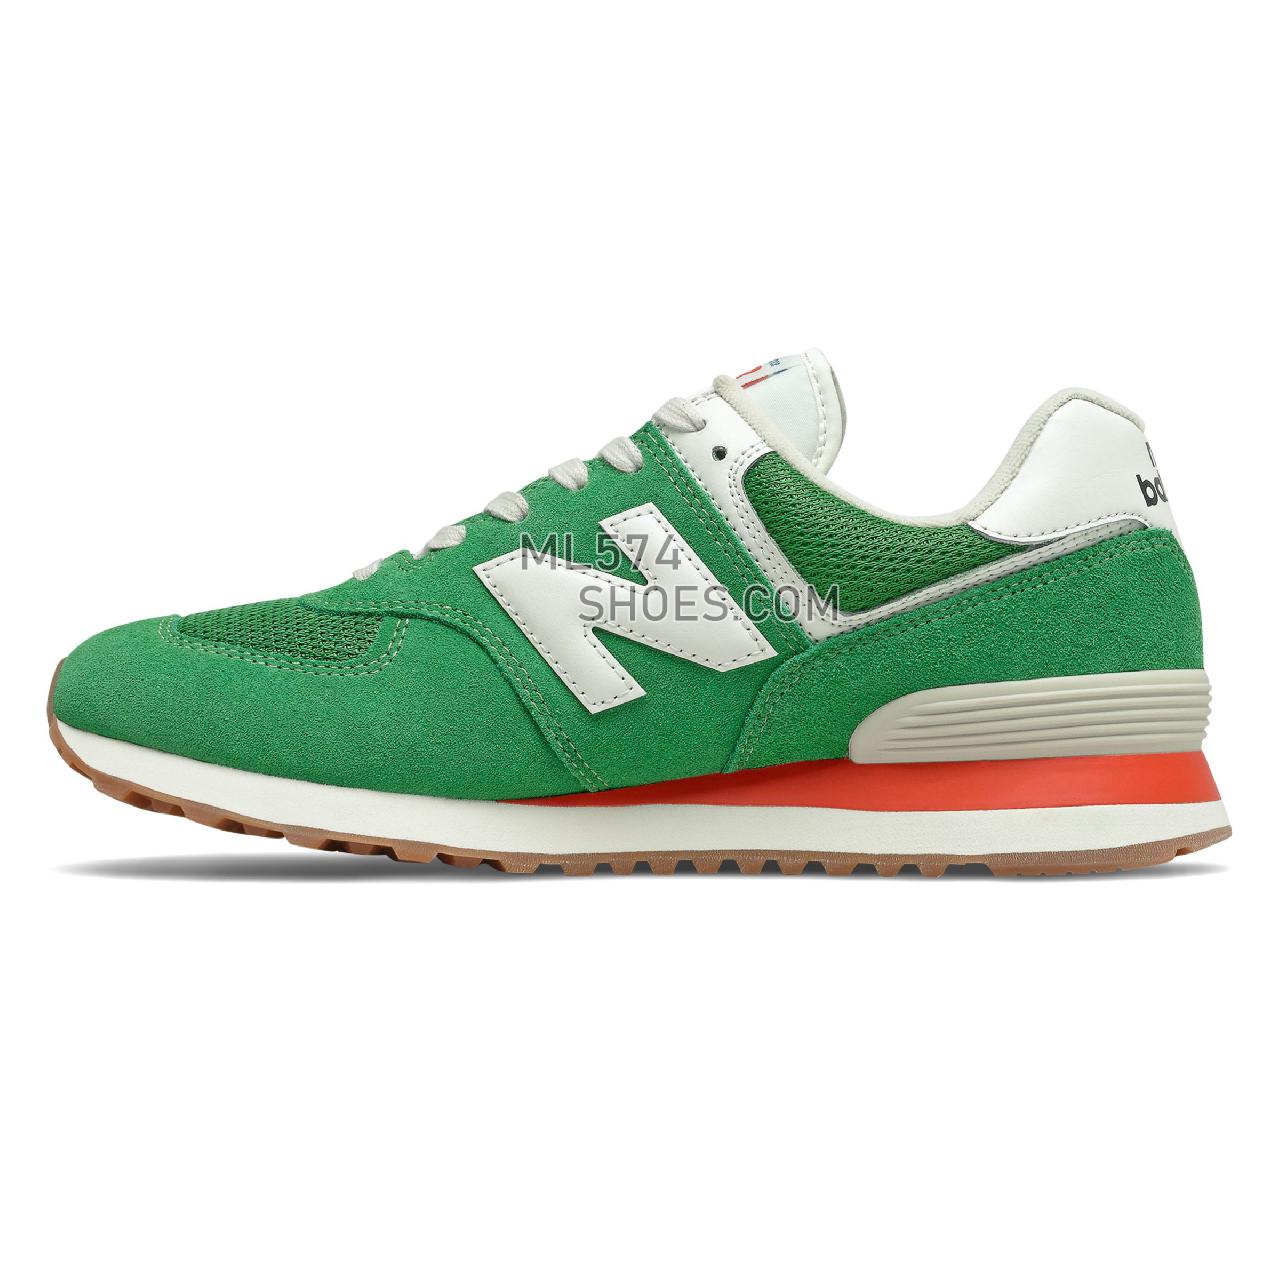 New Balance 574v2 - Men's Classic Sneakers - Varsity Green with Velocity Red - ML574HE2